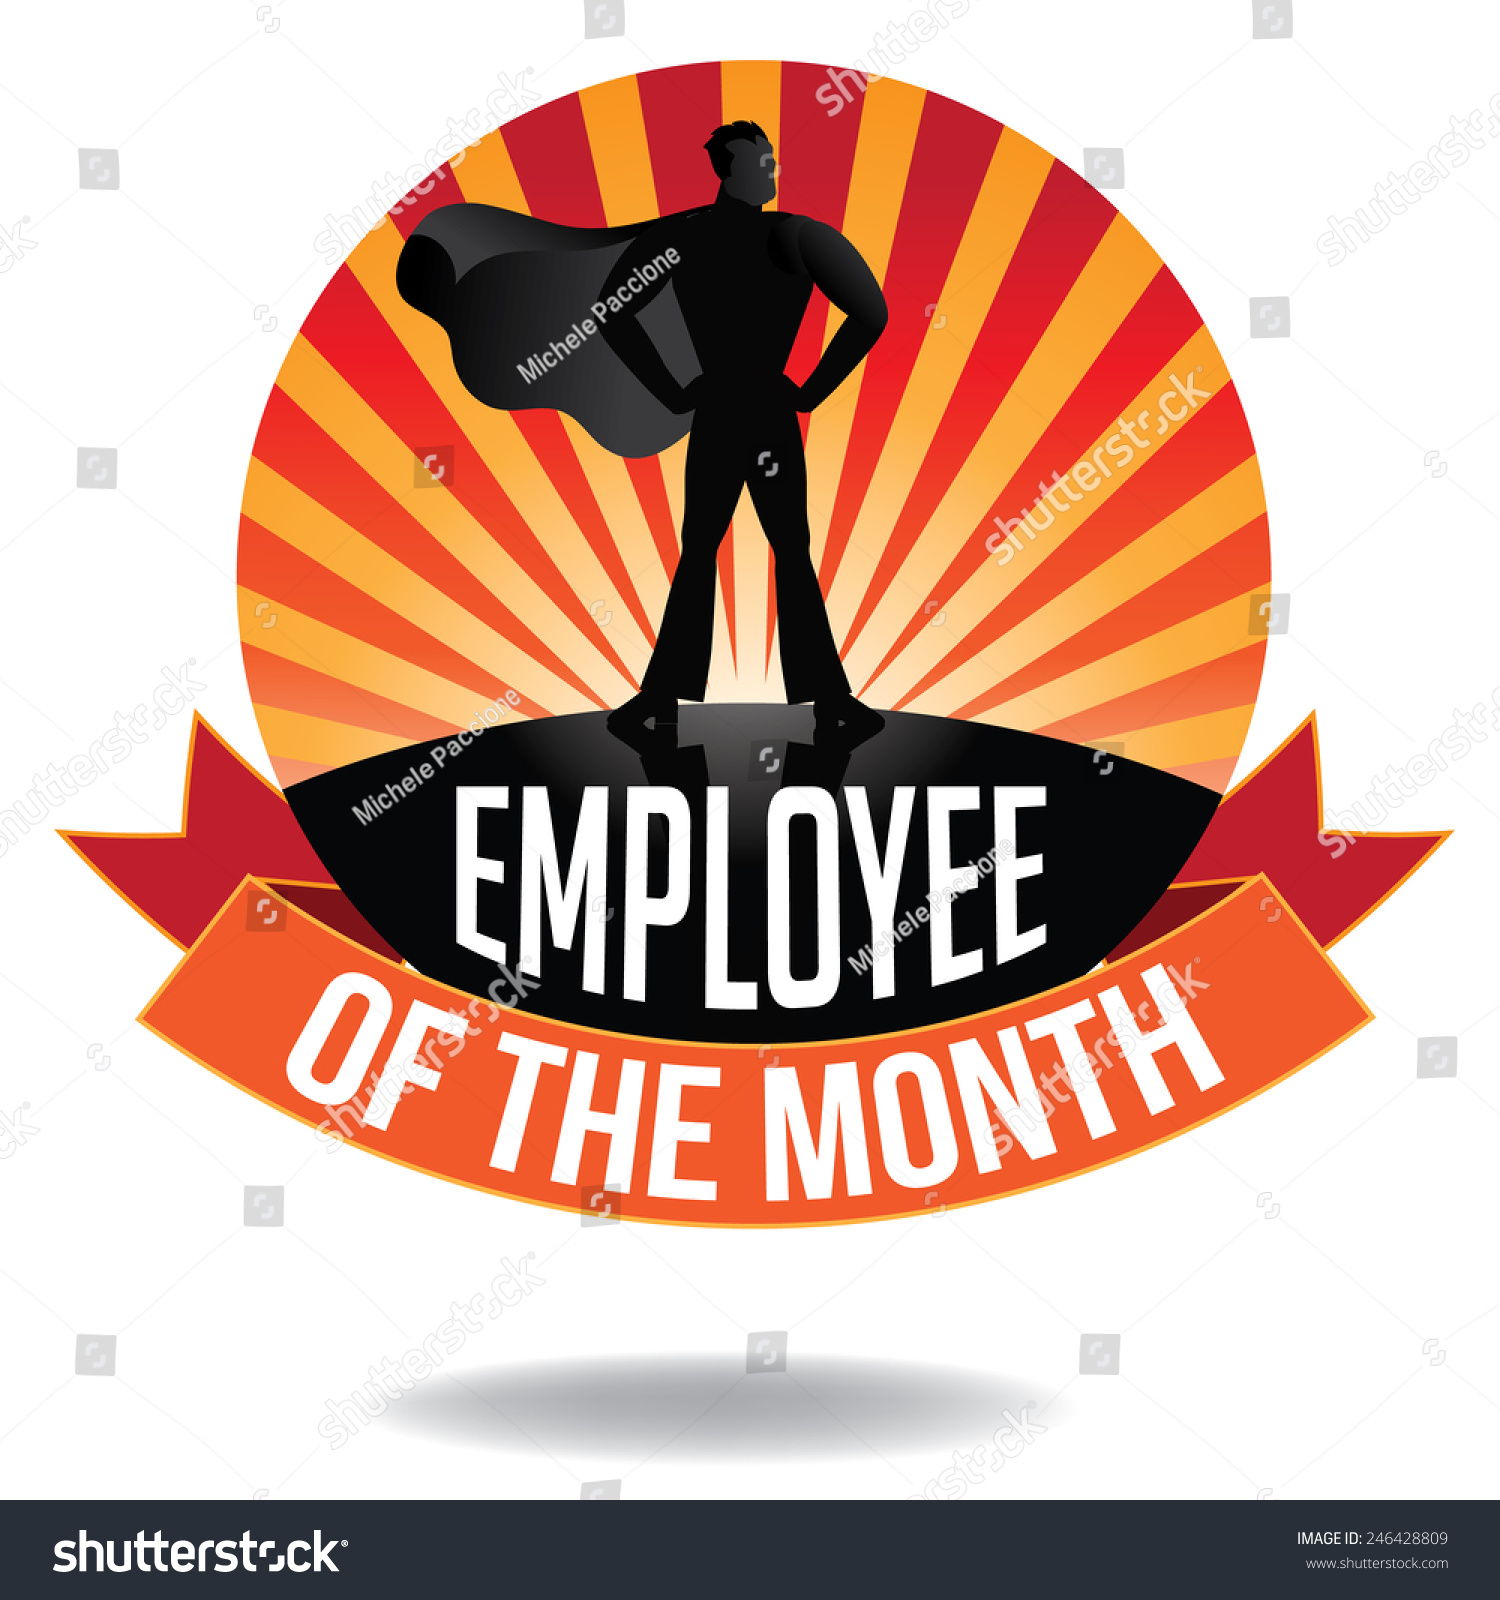 employee of the month clip art - photo #10